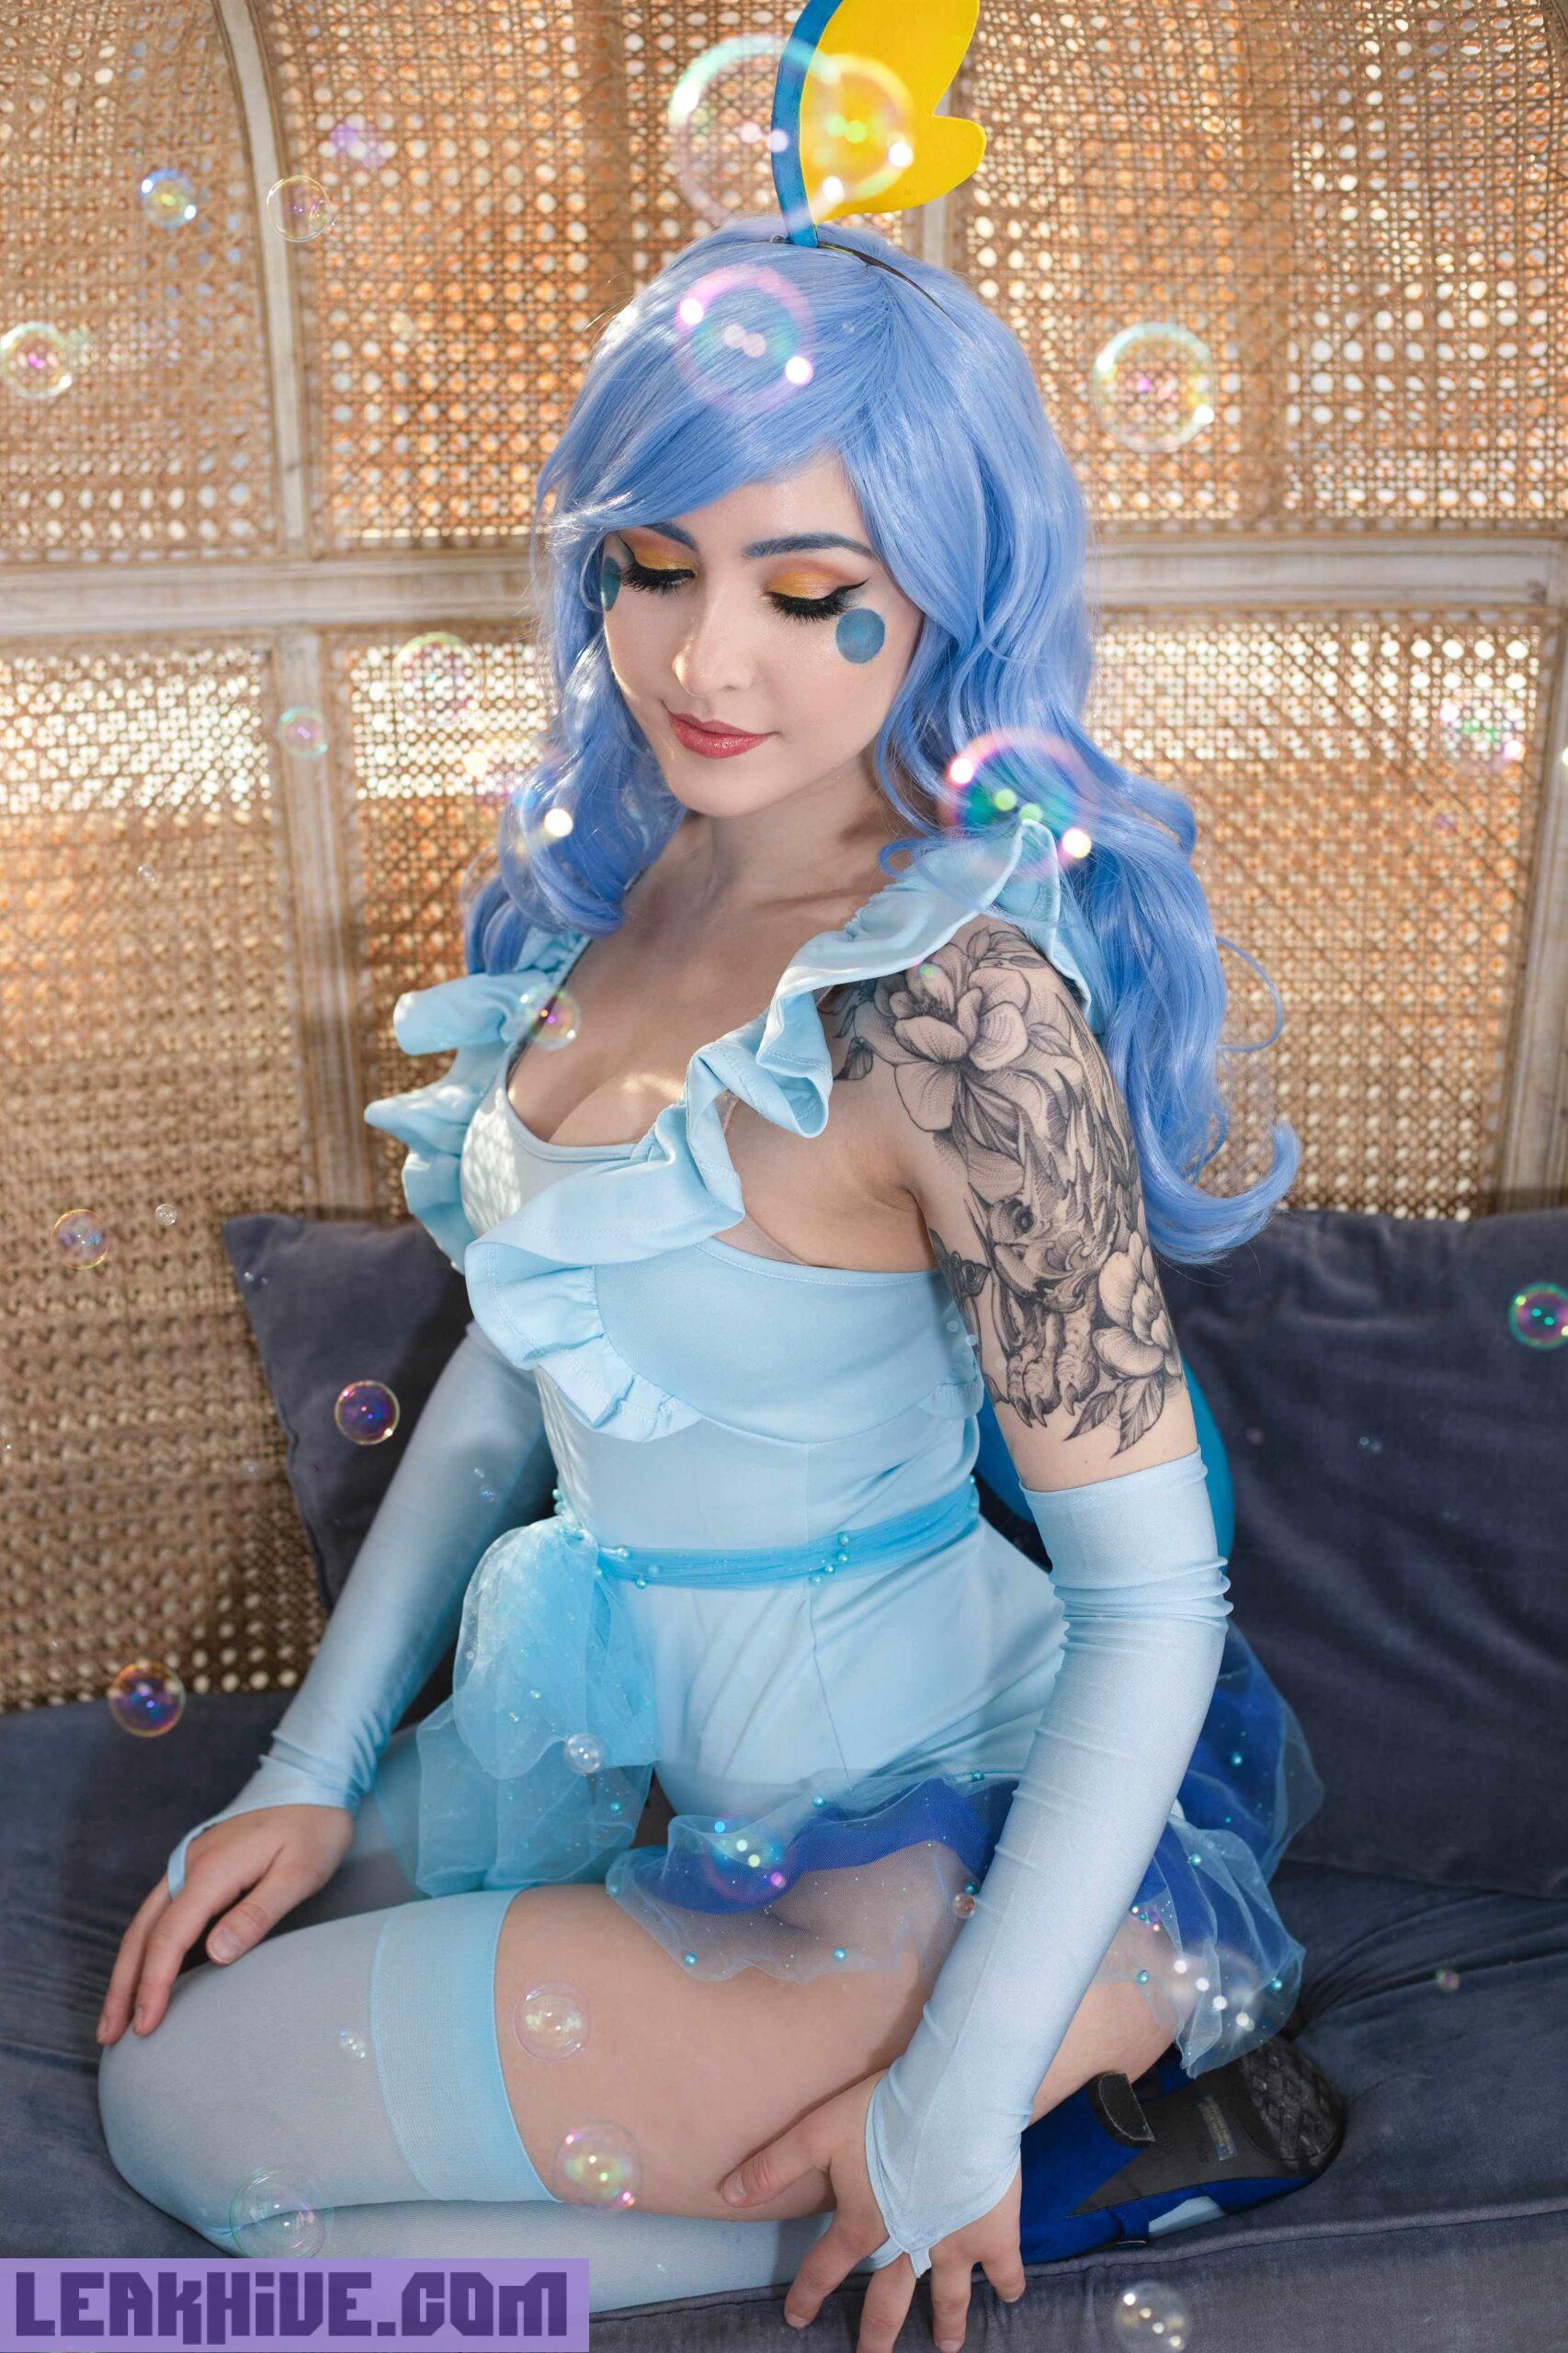 1650006907 502 Luxlo Cosplay Sobble 20 scaled